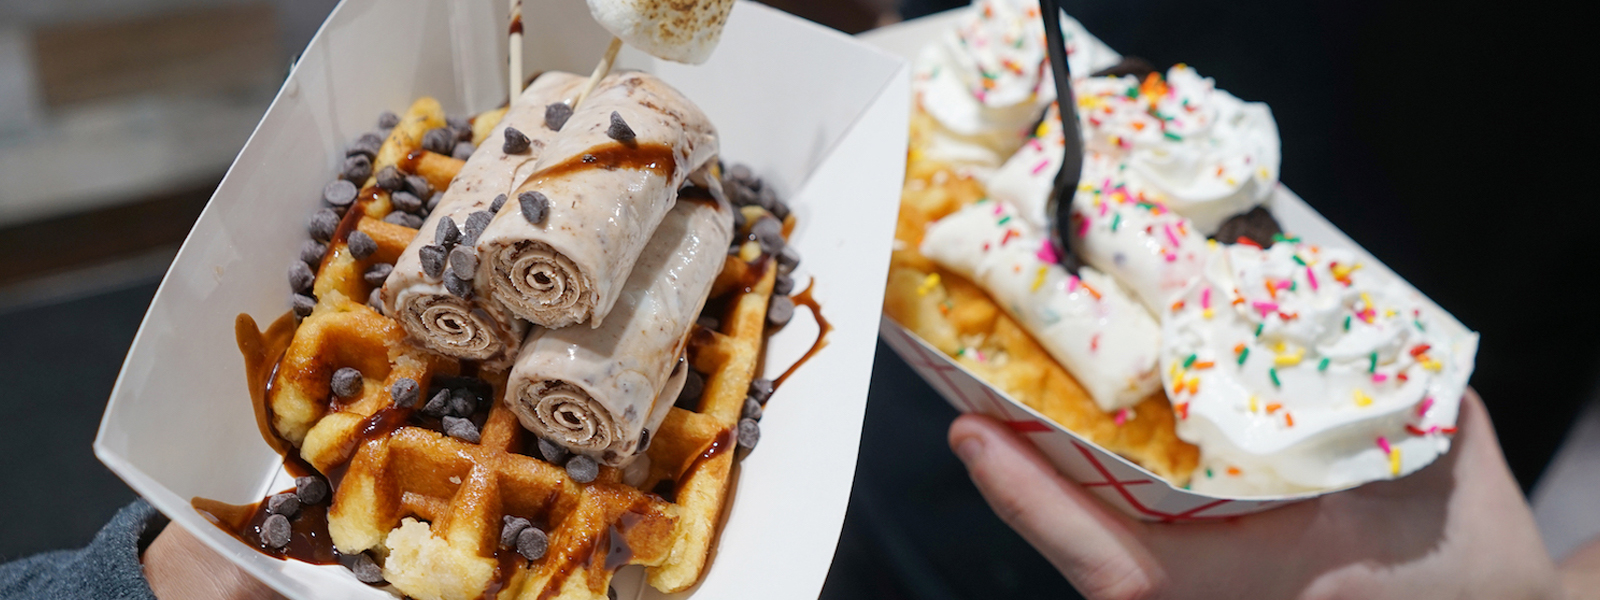 Rolled Ice Cream on top of waffles